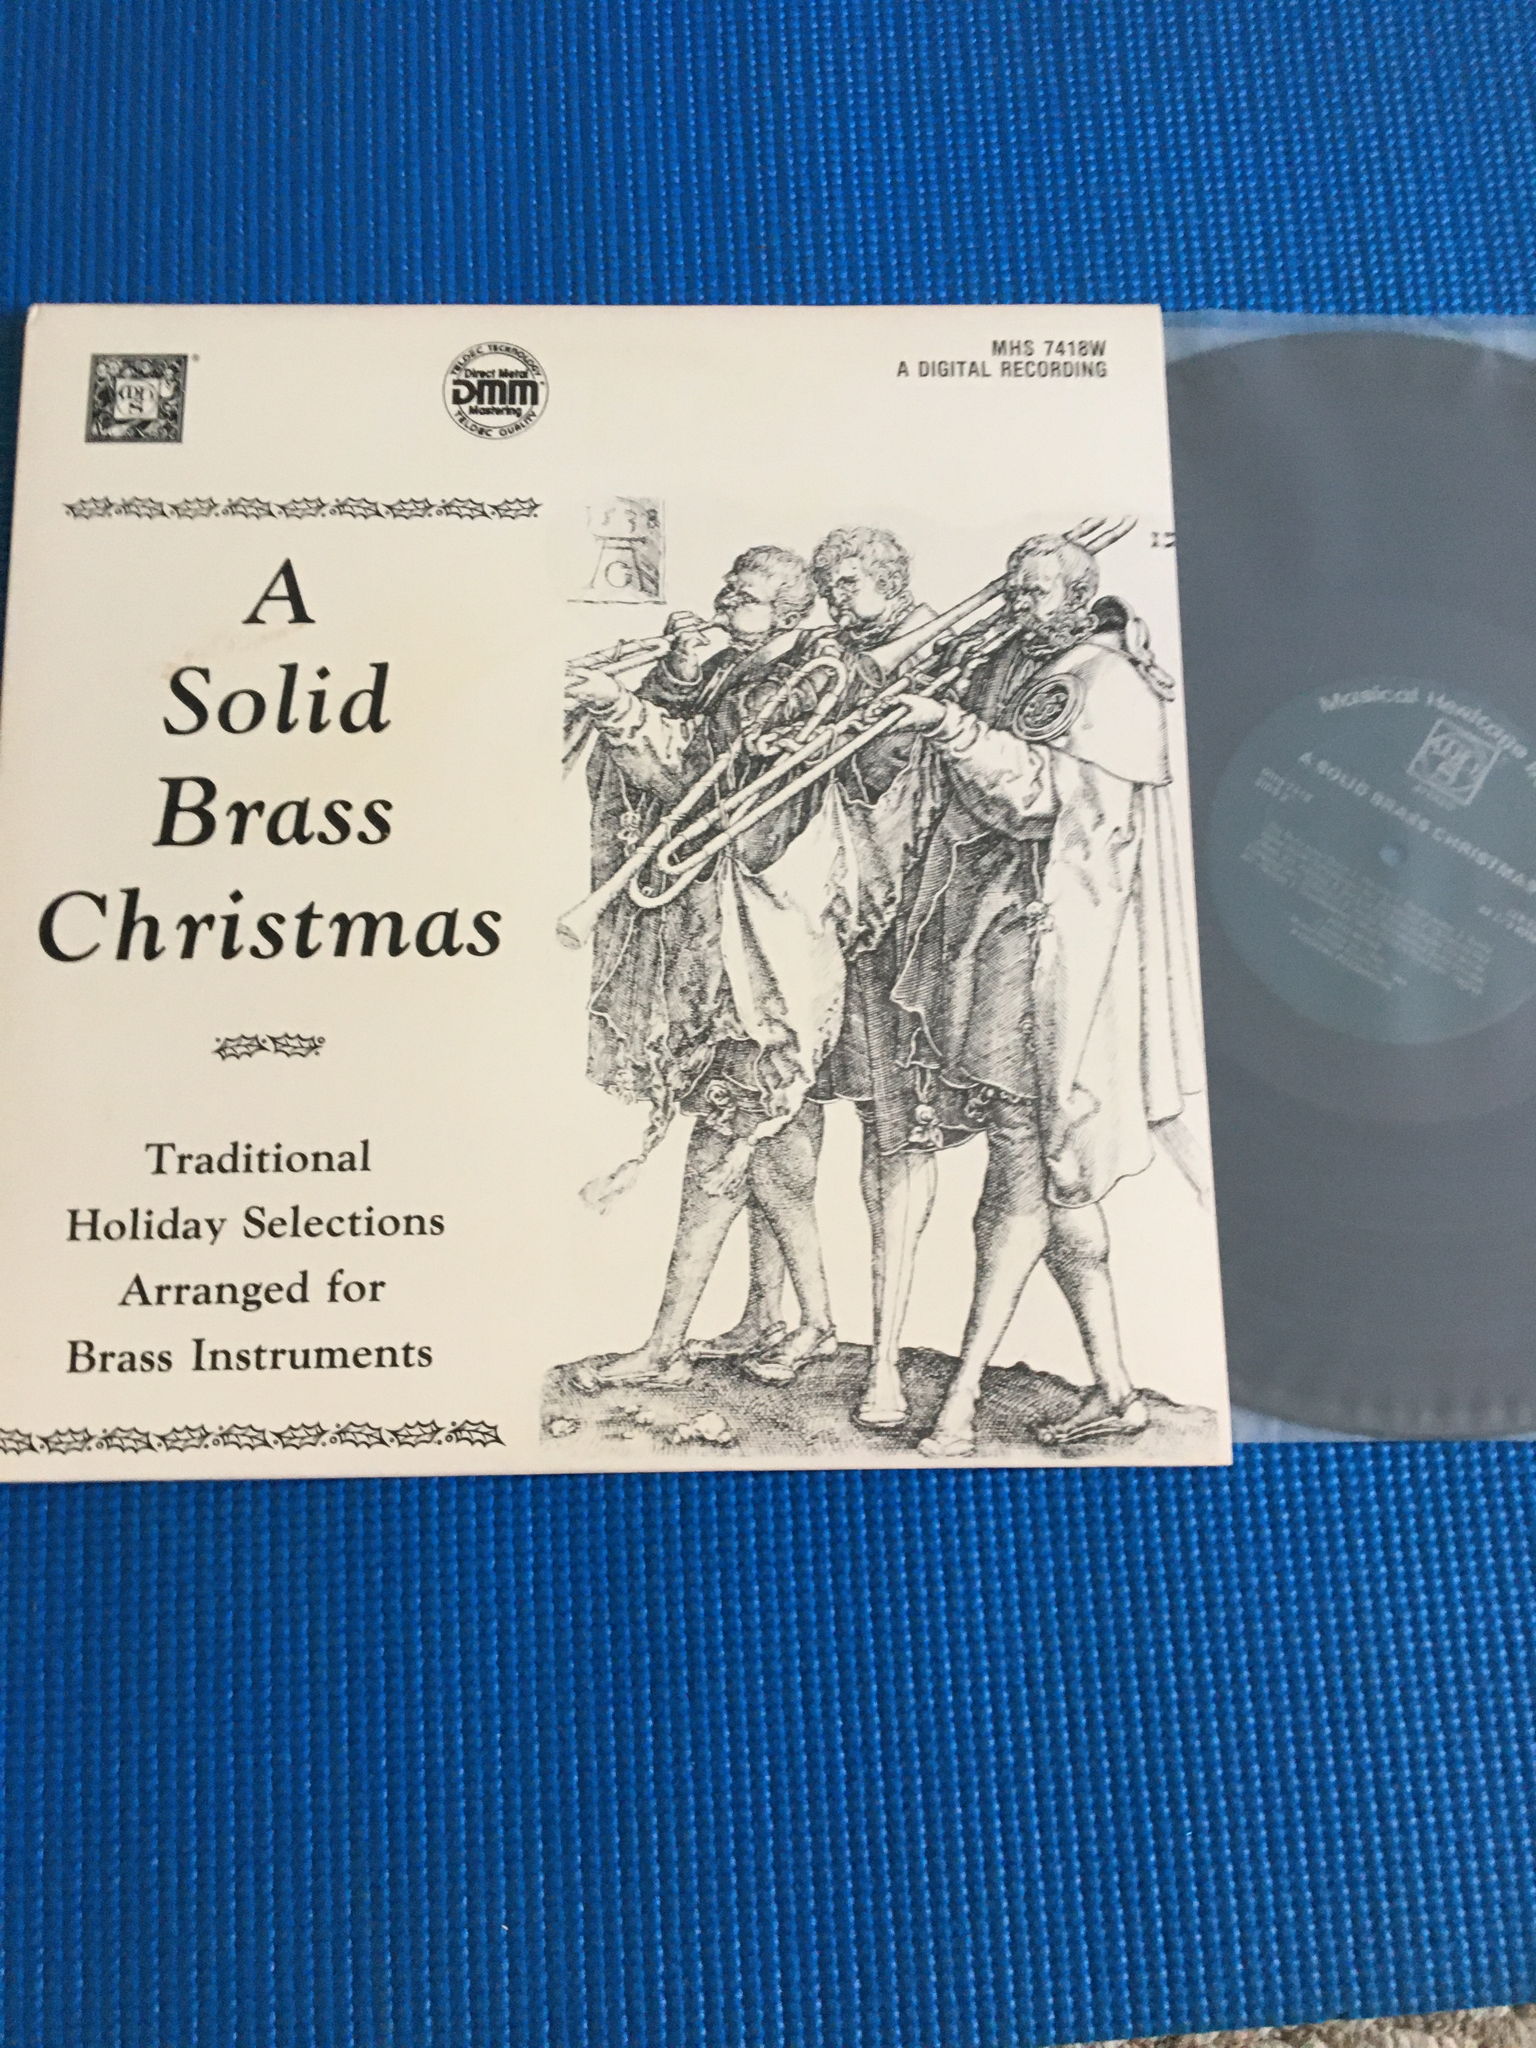 MHS a solid brass Christmas Lp record  Musical heritage...